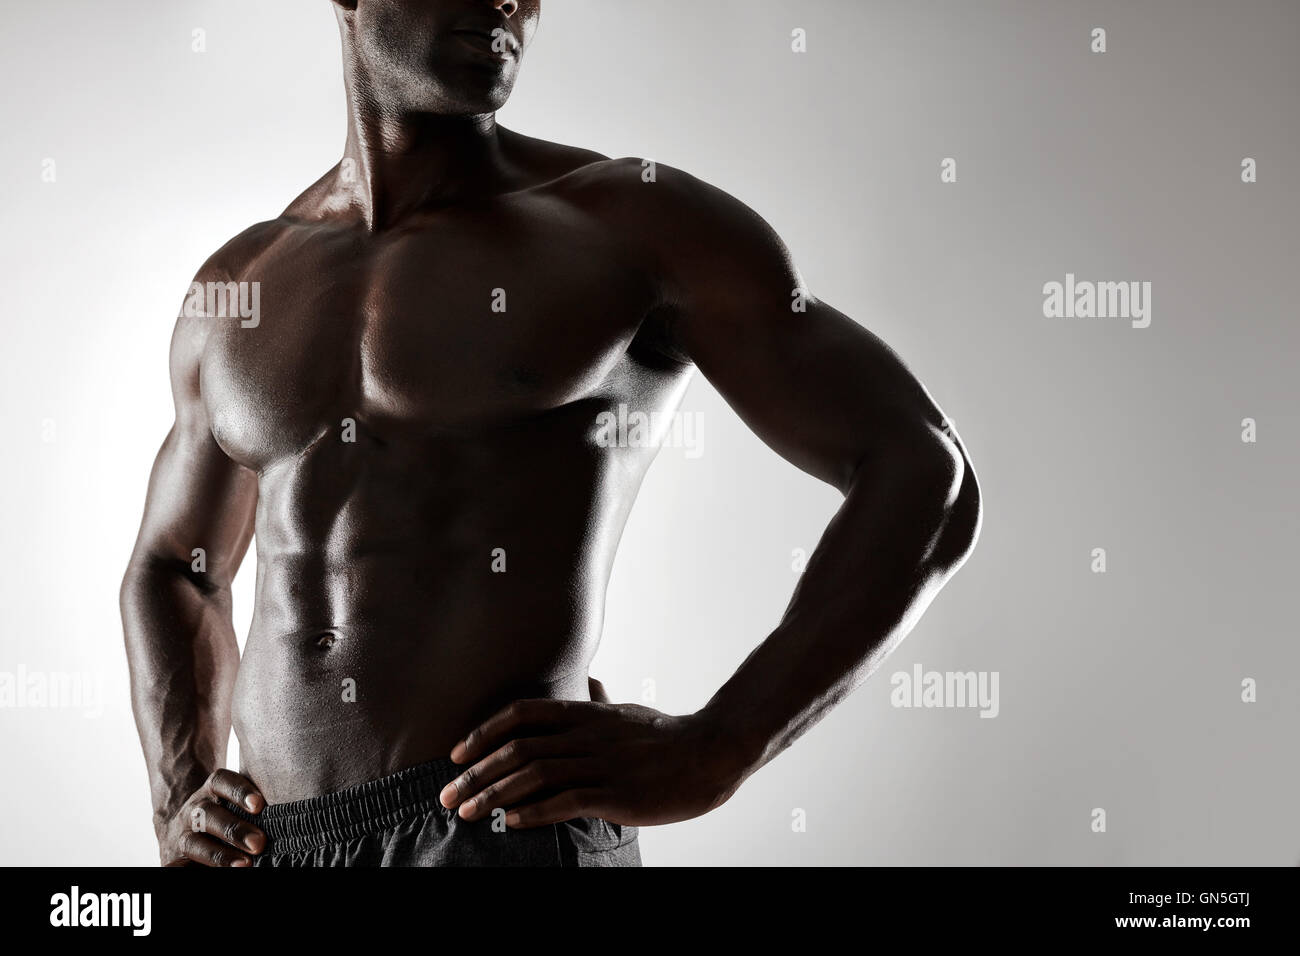 Cropped shot of young man with muscular body standing against grey background. Shirtless male model with hands on hips. Stock Photo